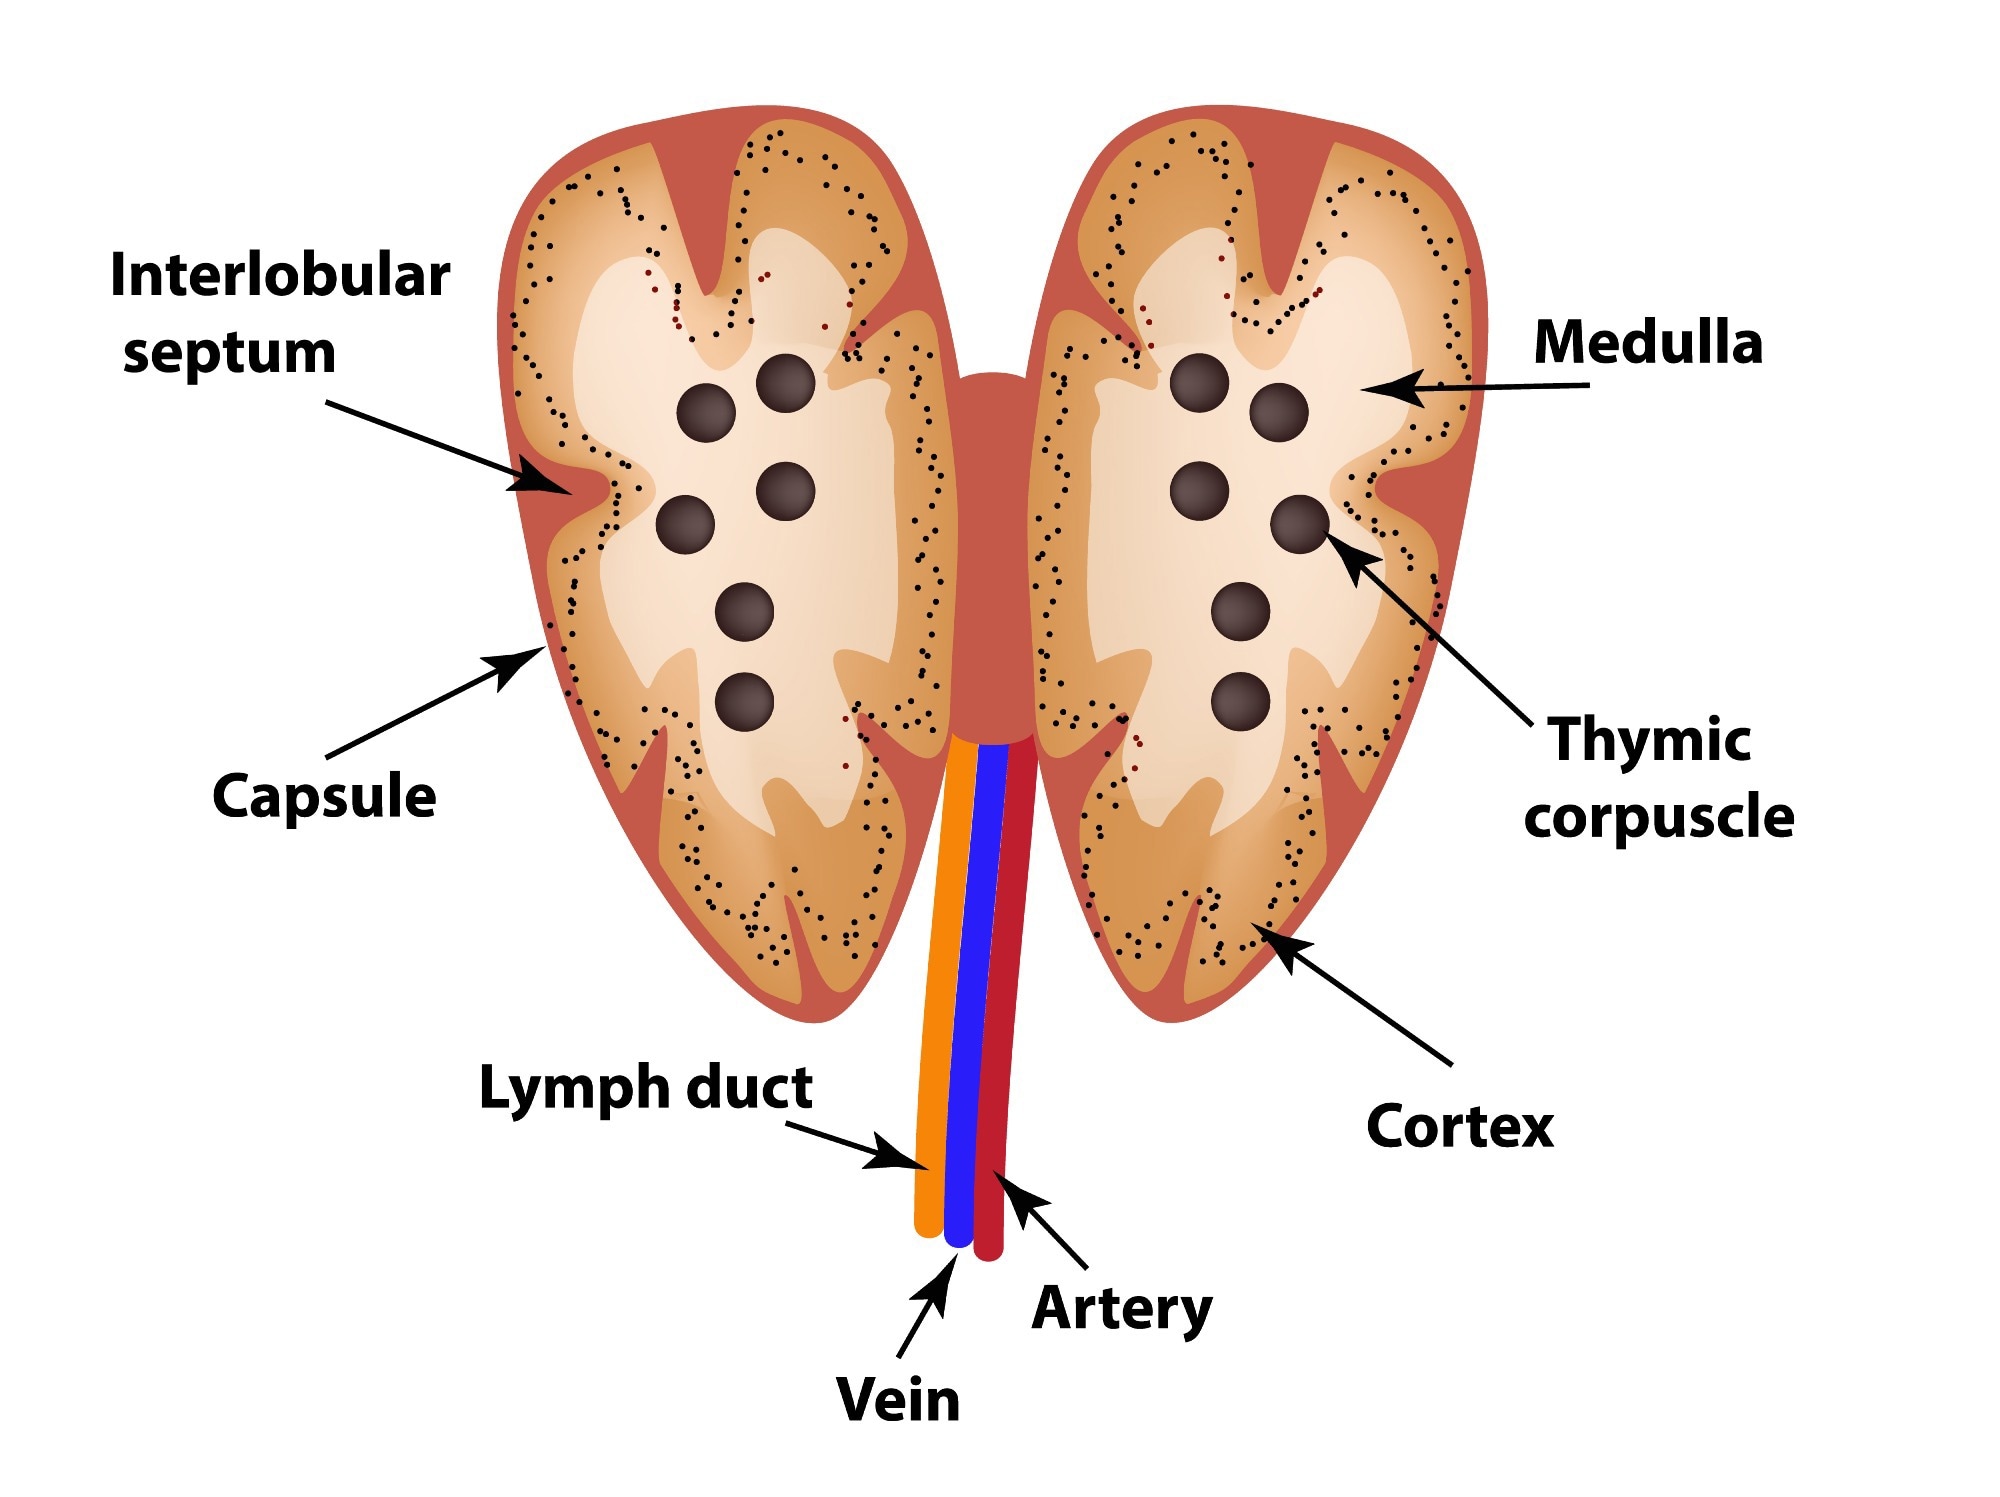 Structure of the thymus. Image Credit: Sakurra / Shutterstock